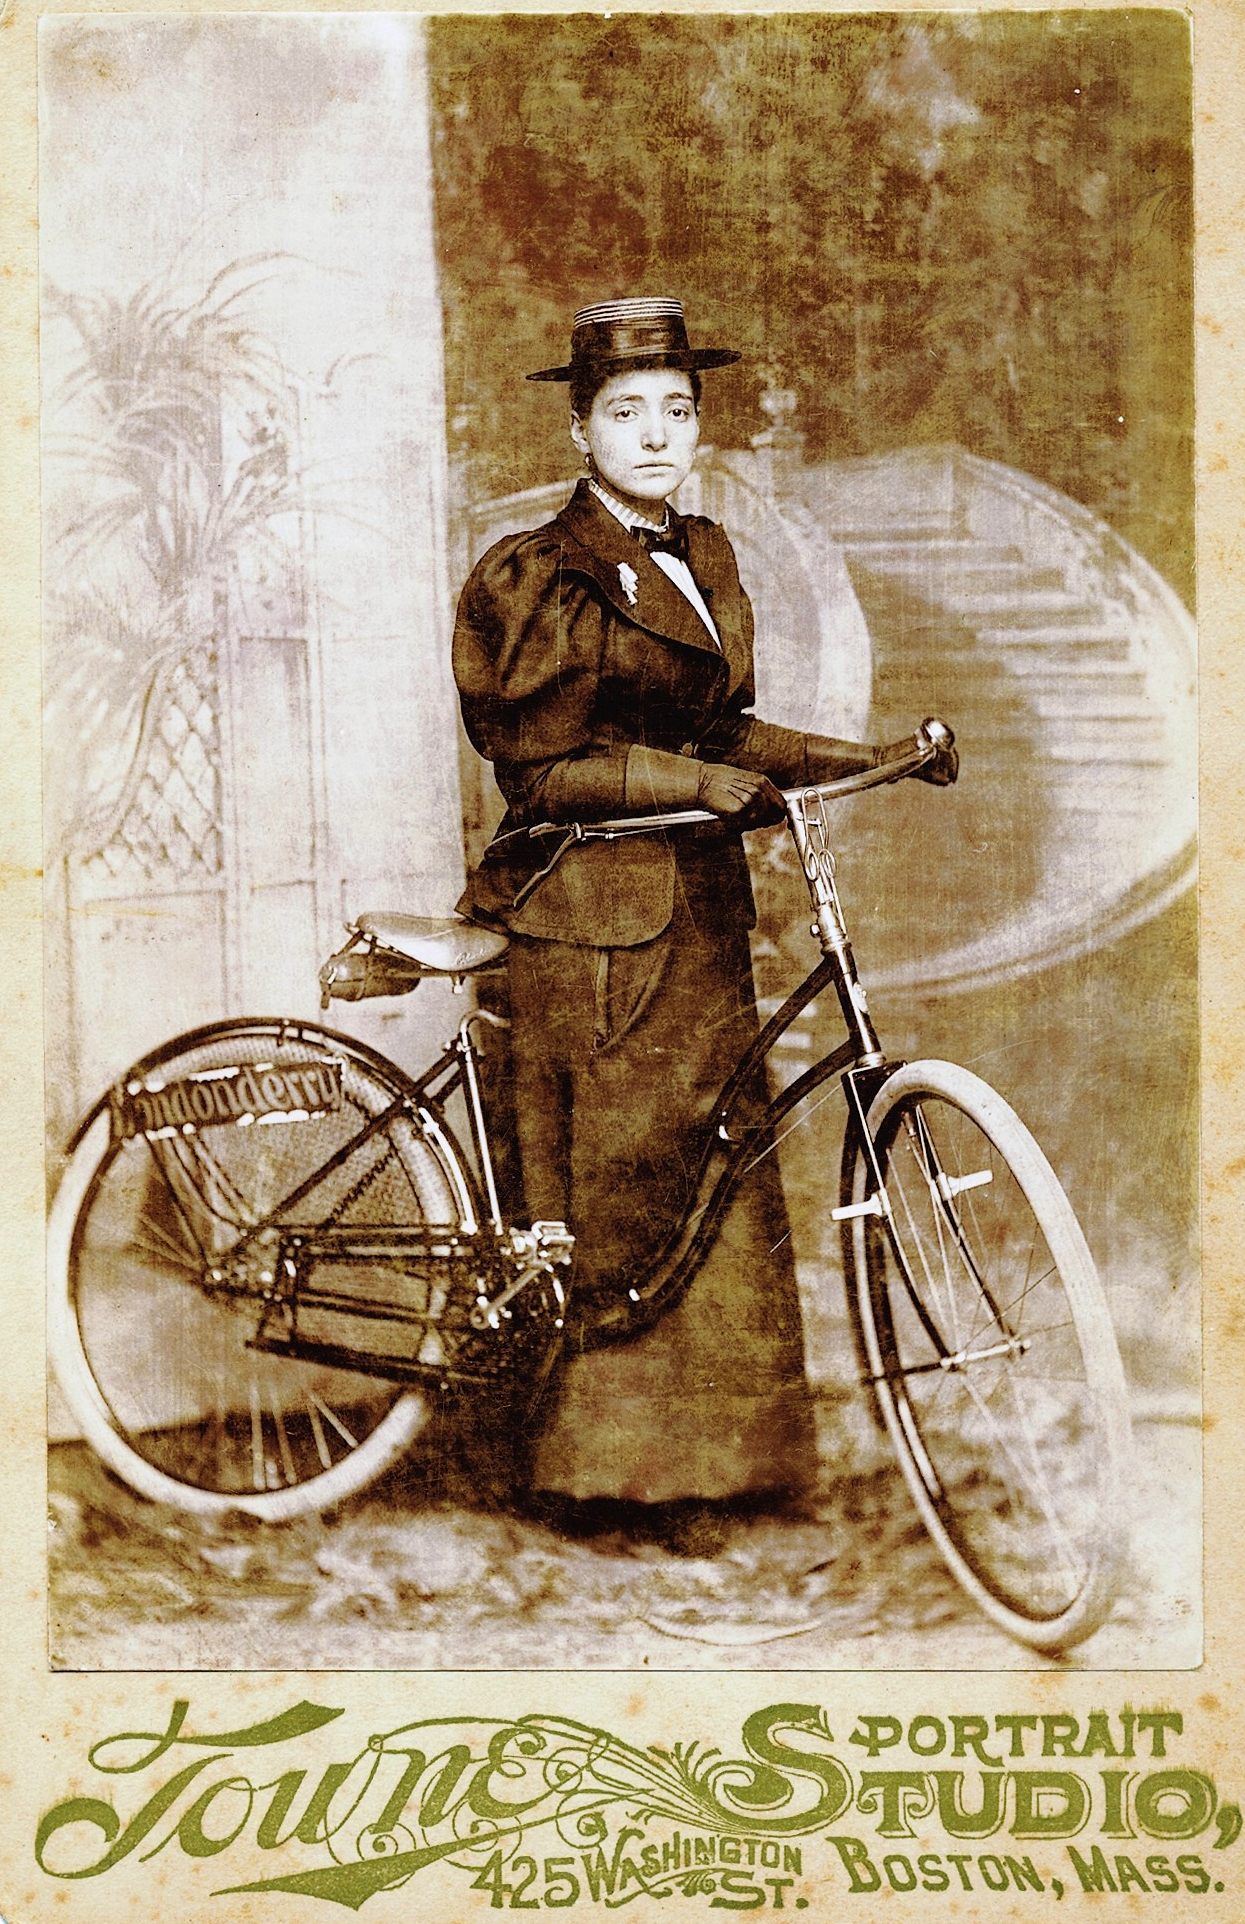 Annie Londonderry was Annie Kopchovsky until the Londonderry Lithia Spring Water Company sponsored her bike ride.